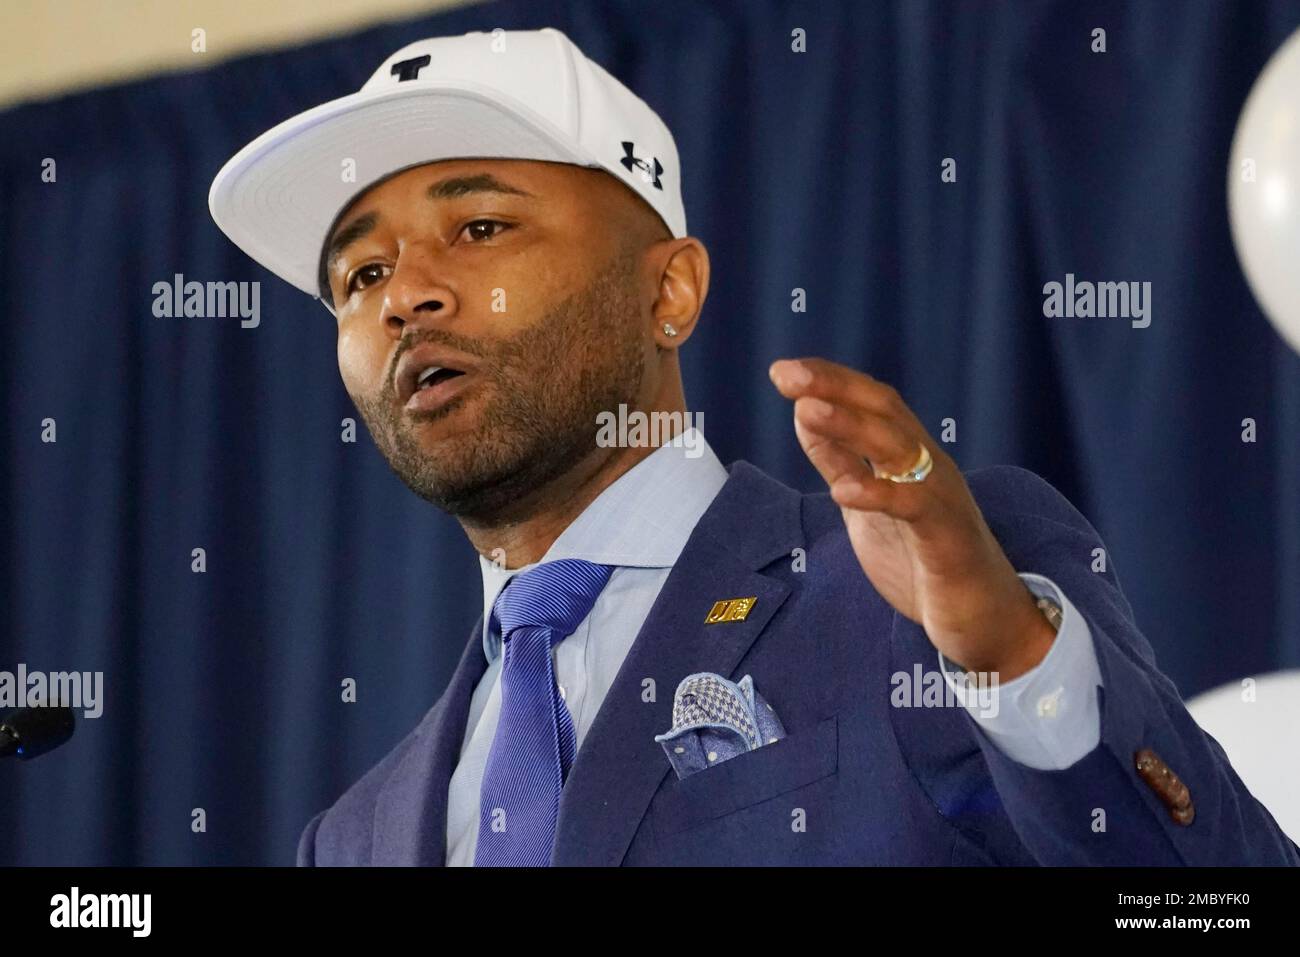 NBA champion and Jackson, Miss., native Mo Williams, tells of his team  vision at a news conference announcing his appointment as the new head  basketball coach at Jackson State, Monday, March 14,